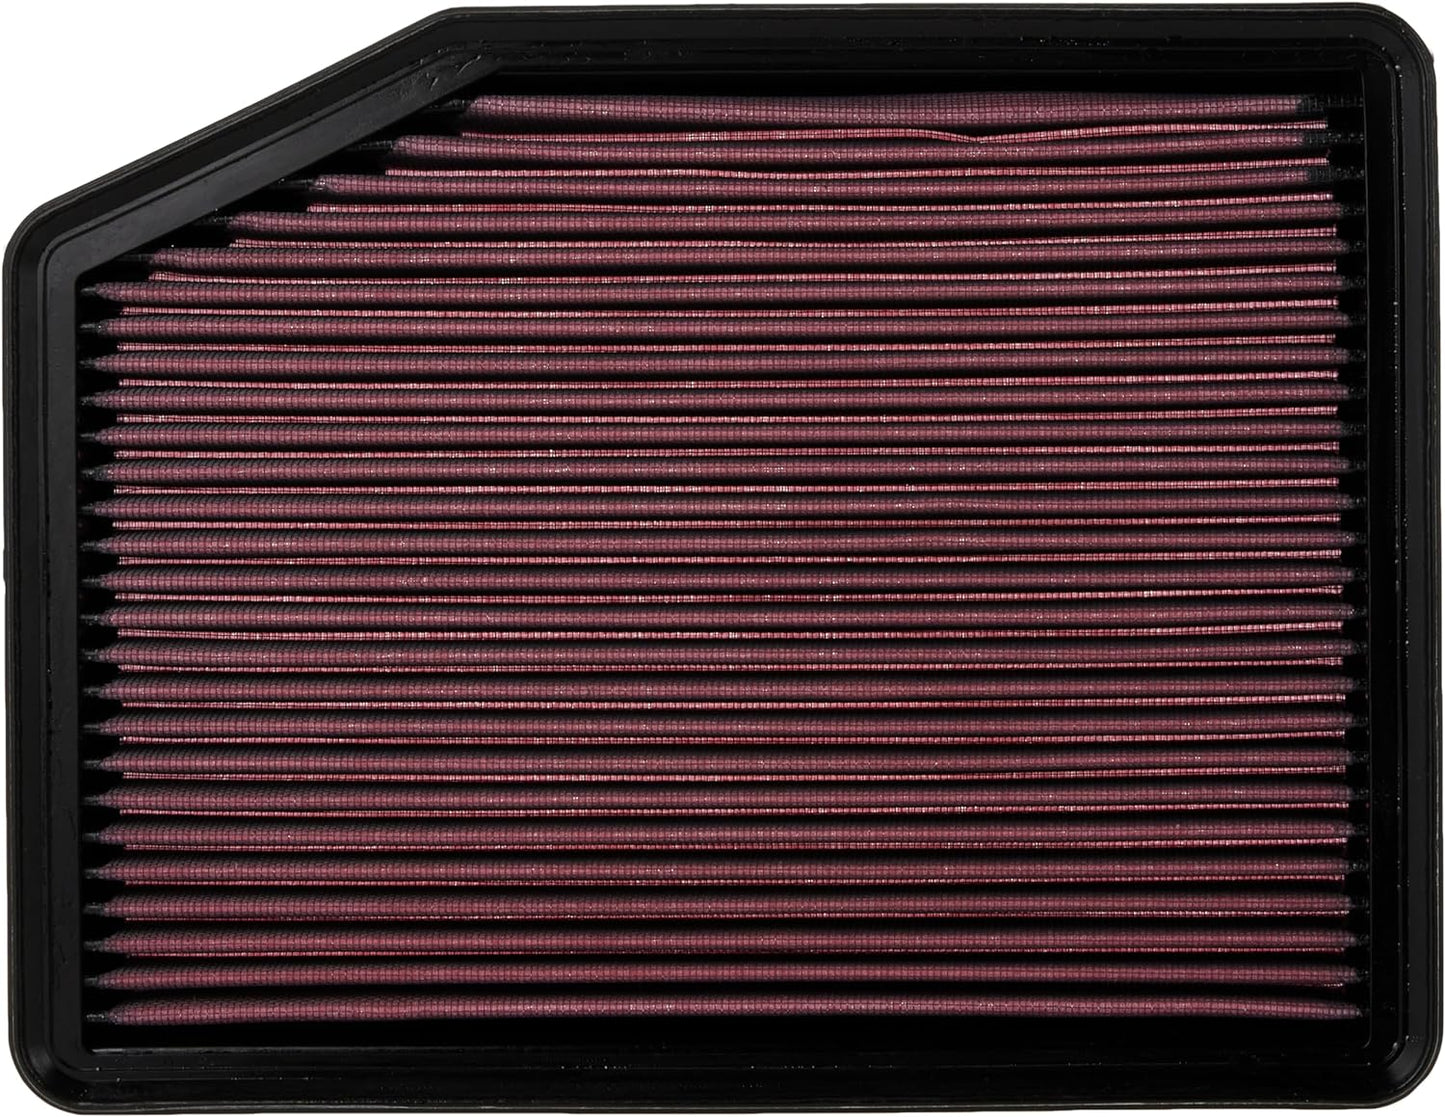 K&N Engine Air Filter: Reusable, Clean Every 75,000 Miles, Washable, Premium, Replacement Car Air Filter: Compatible with 2012-2019 Hyundai/Kia (Santa Fe, Sorento), 33-2493